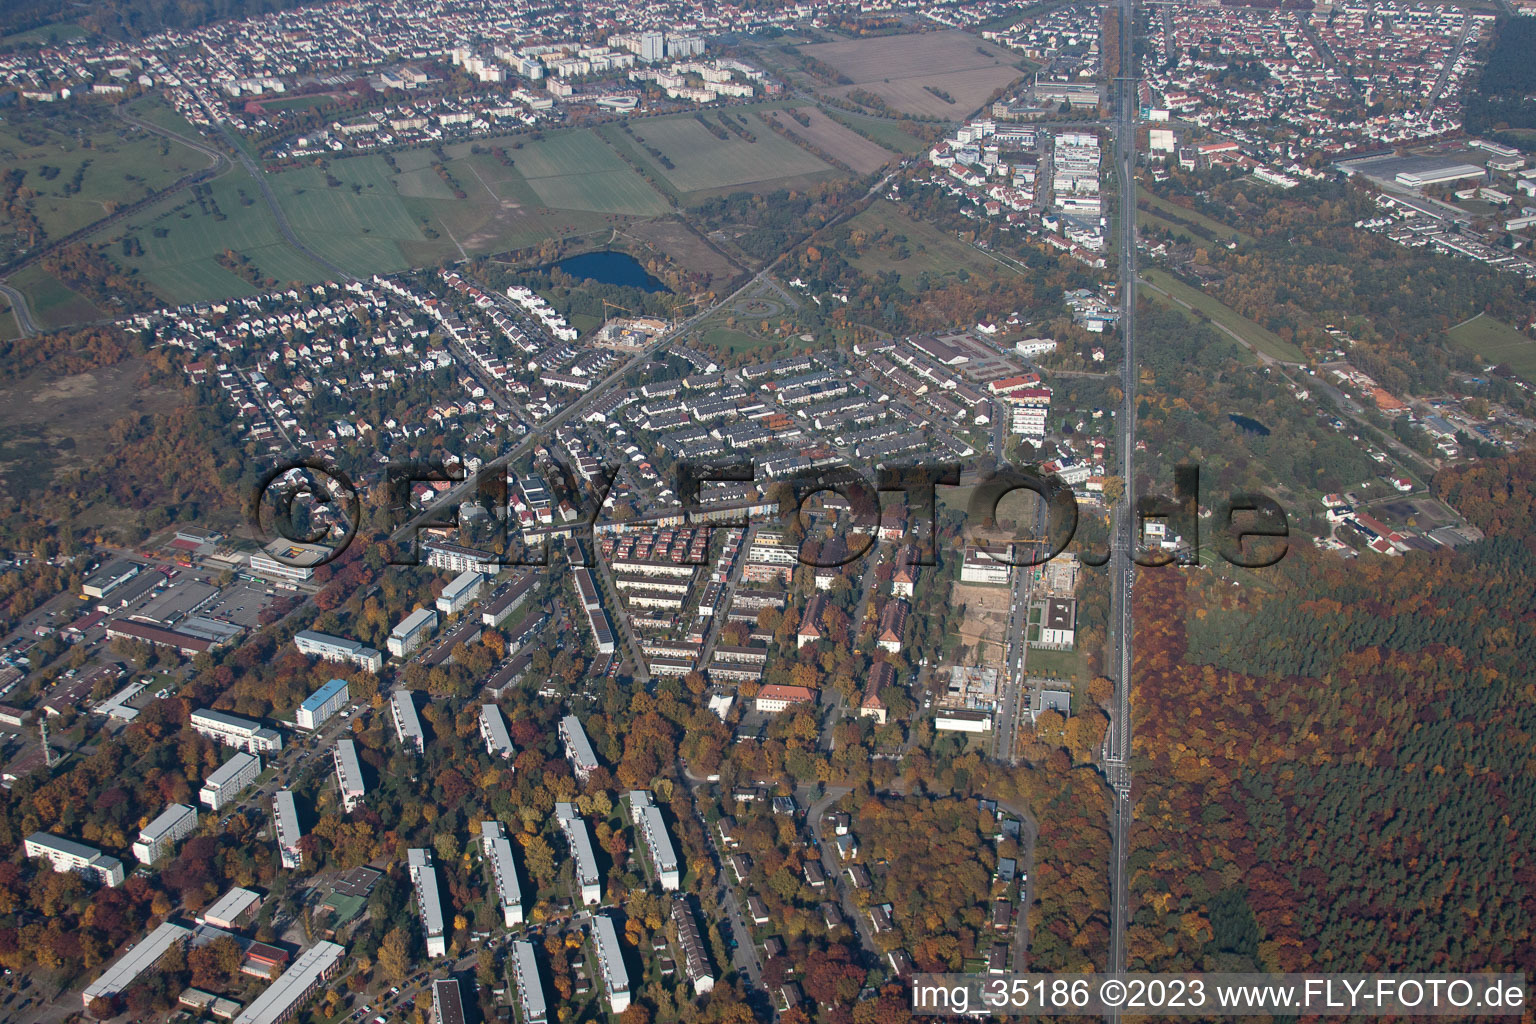 District Neureut in Karlsruhe in the state Baden-Wuerttemberg, Germany seen from a drone